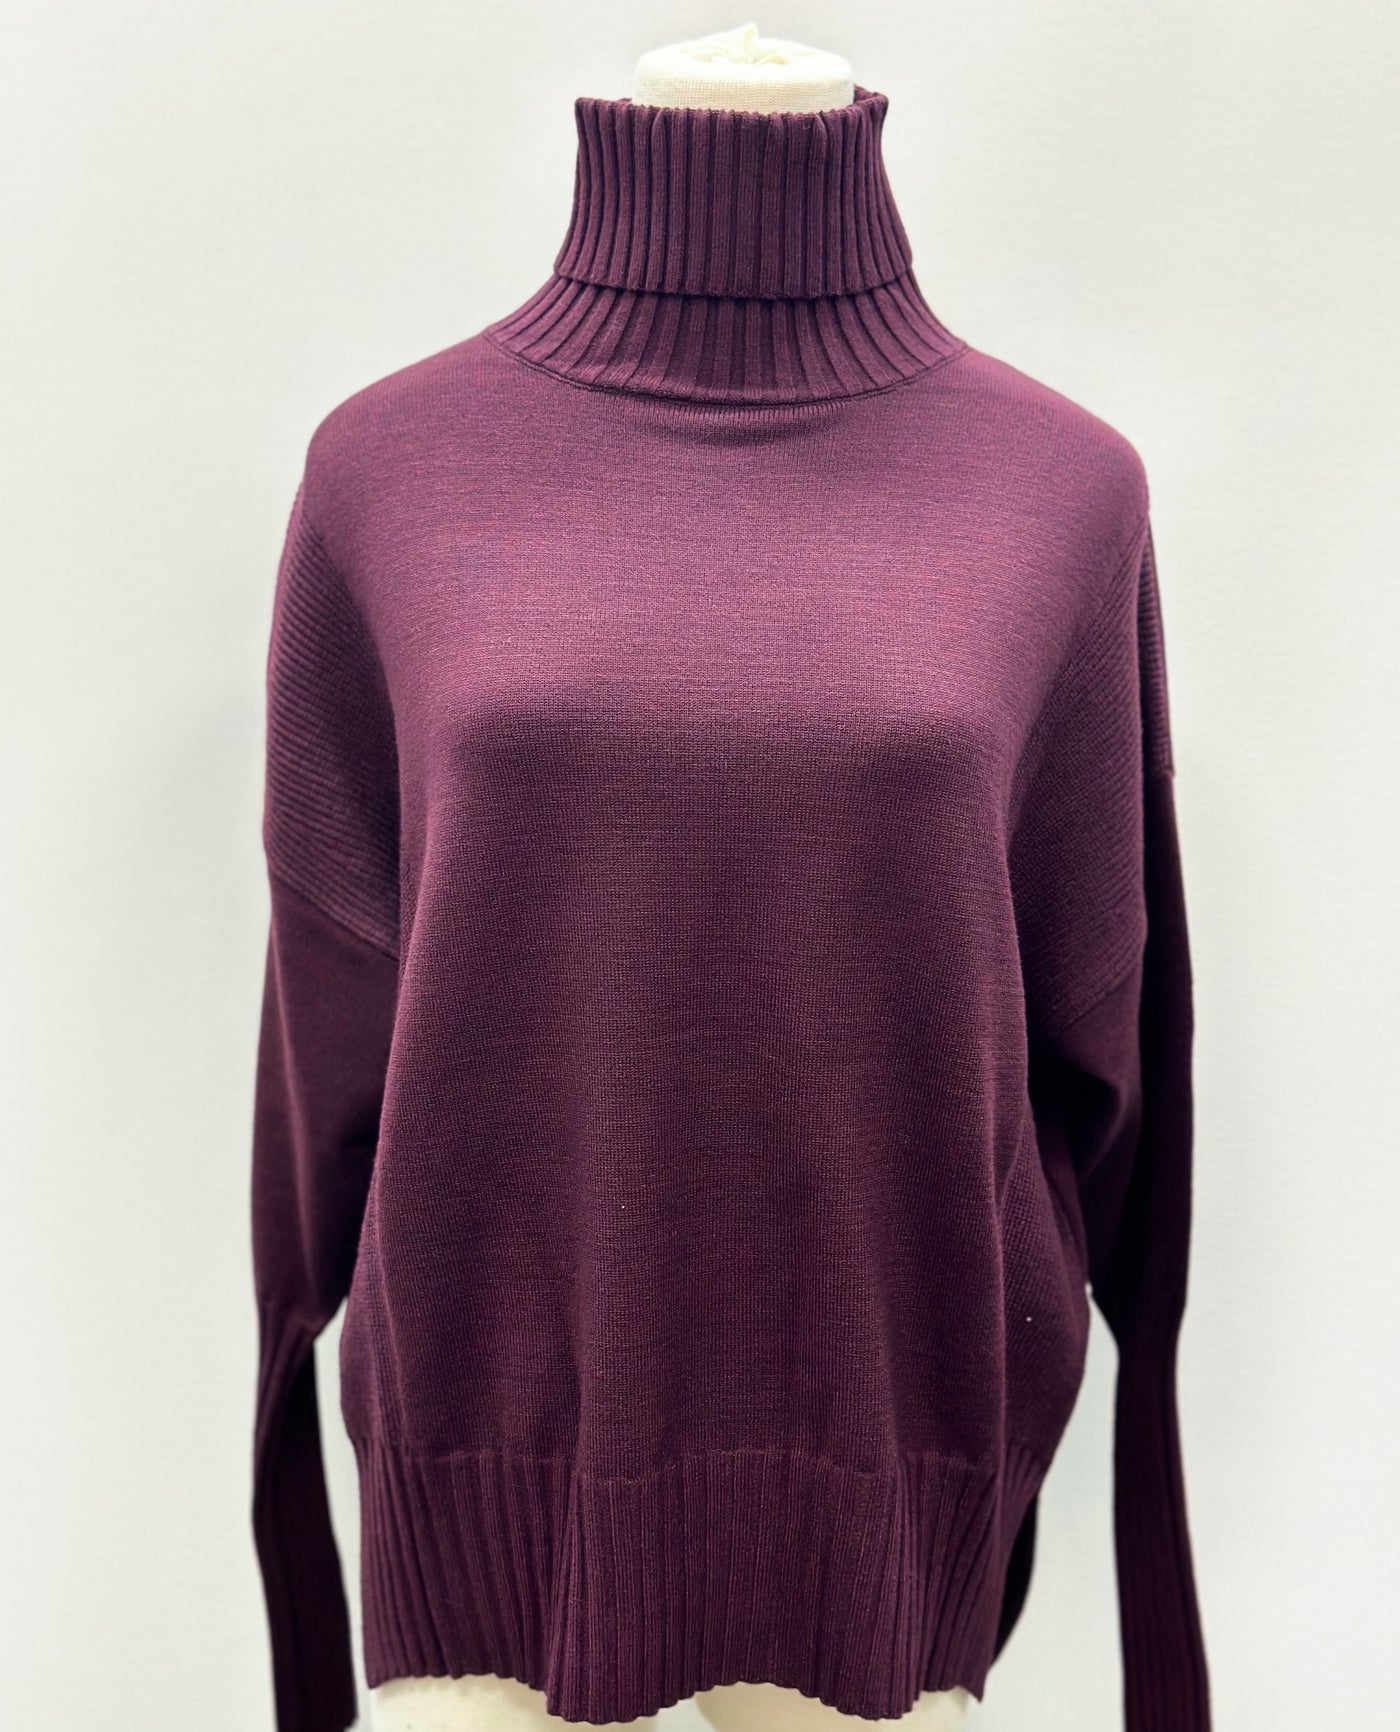 FLORA SWEATER-grey, jeans or wine